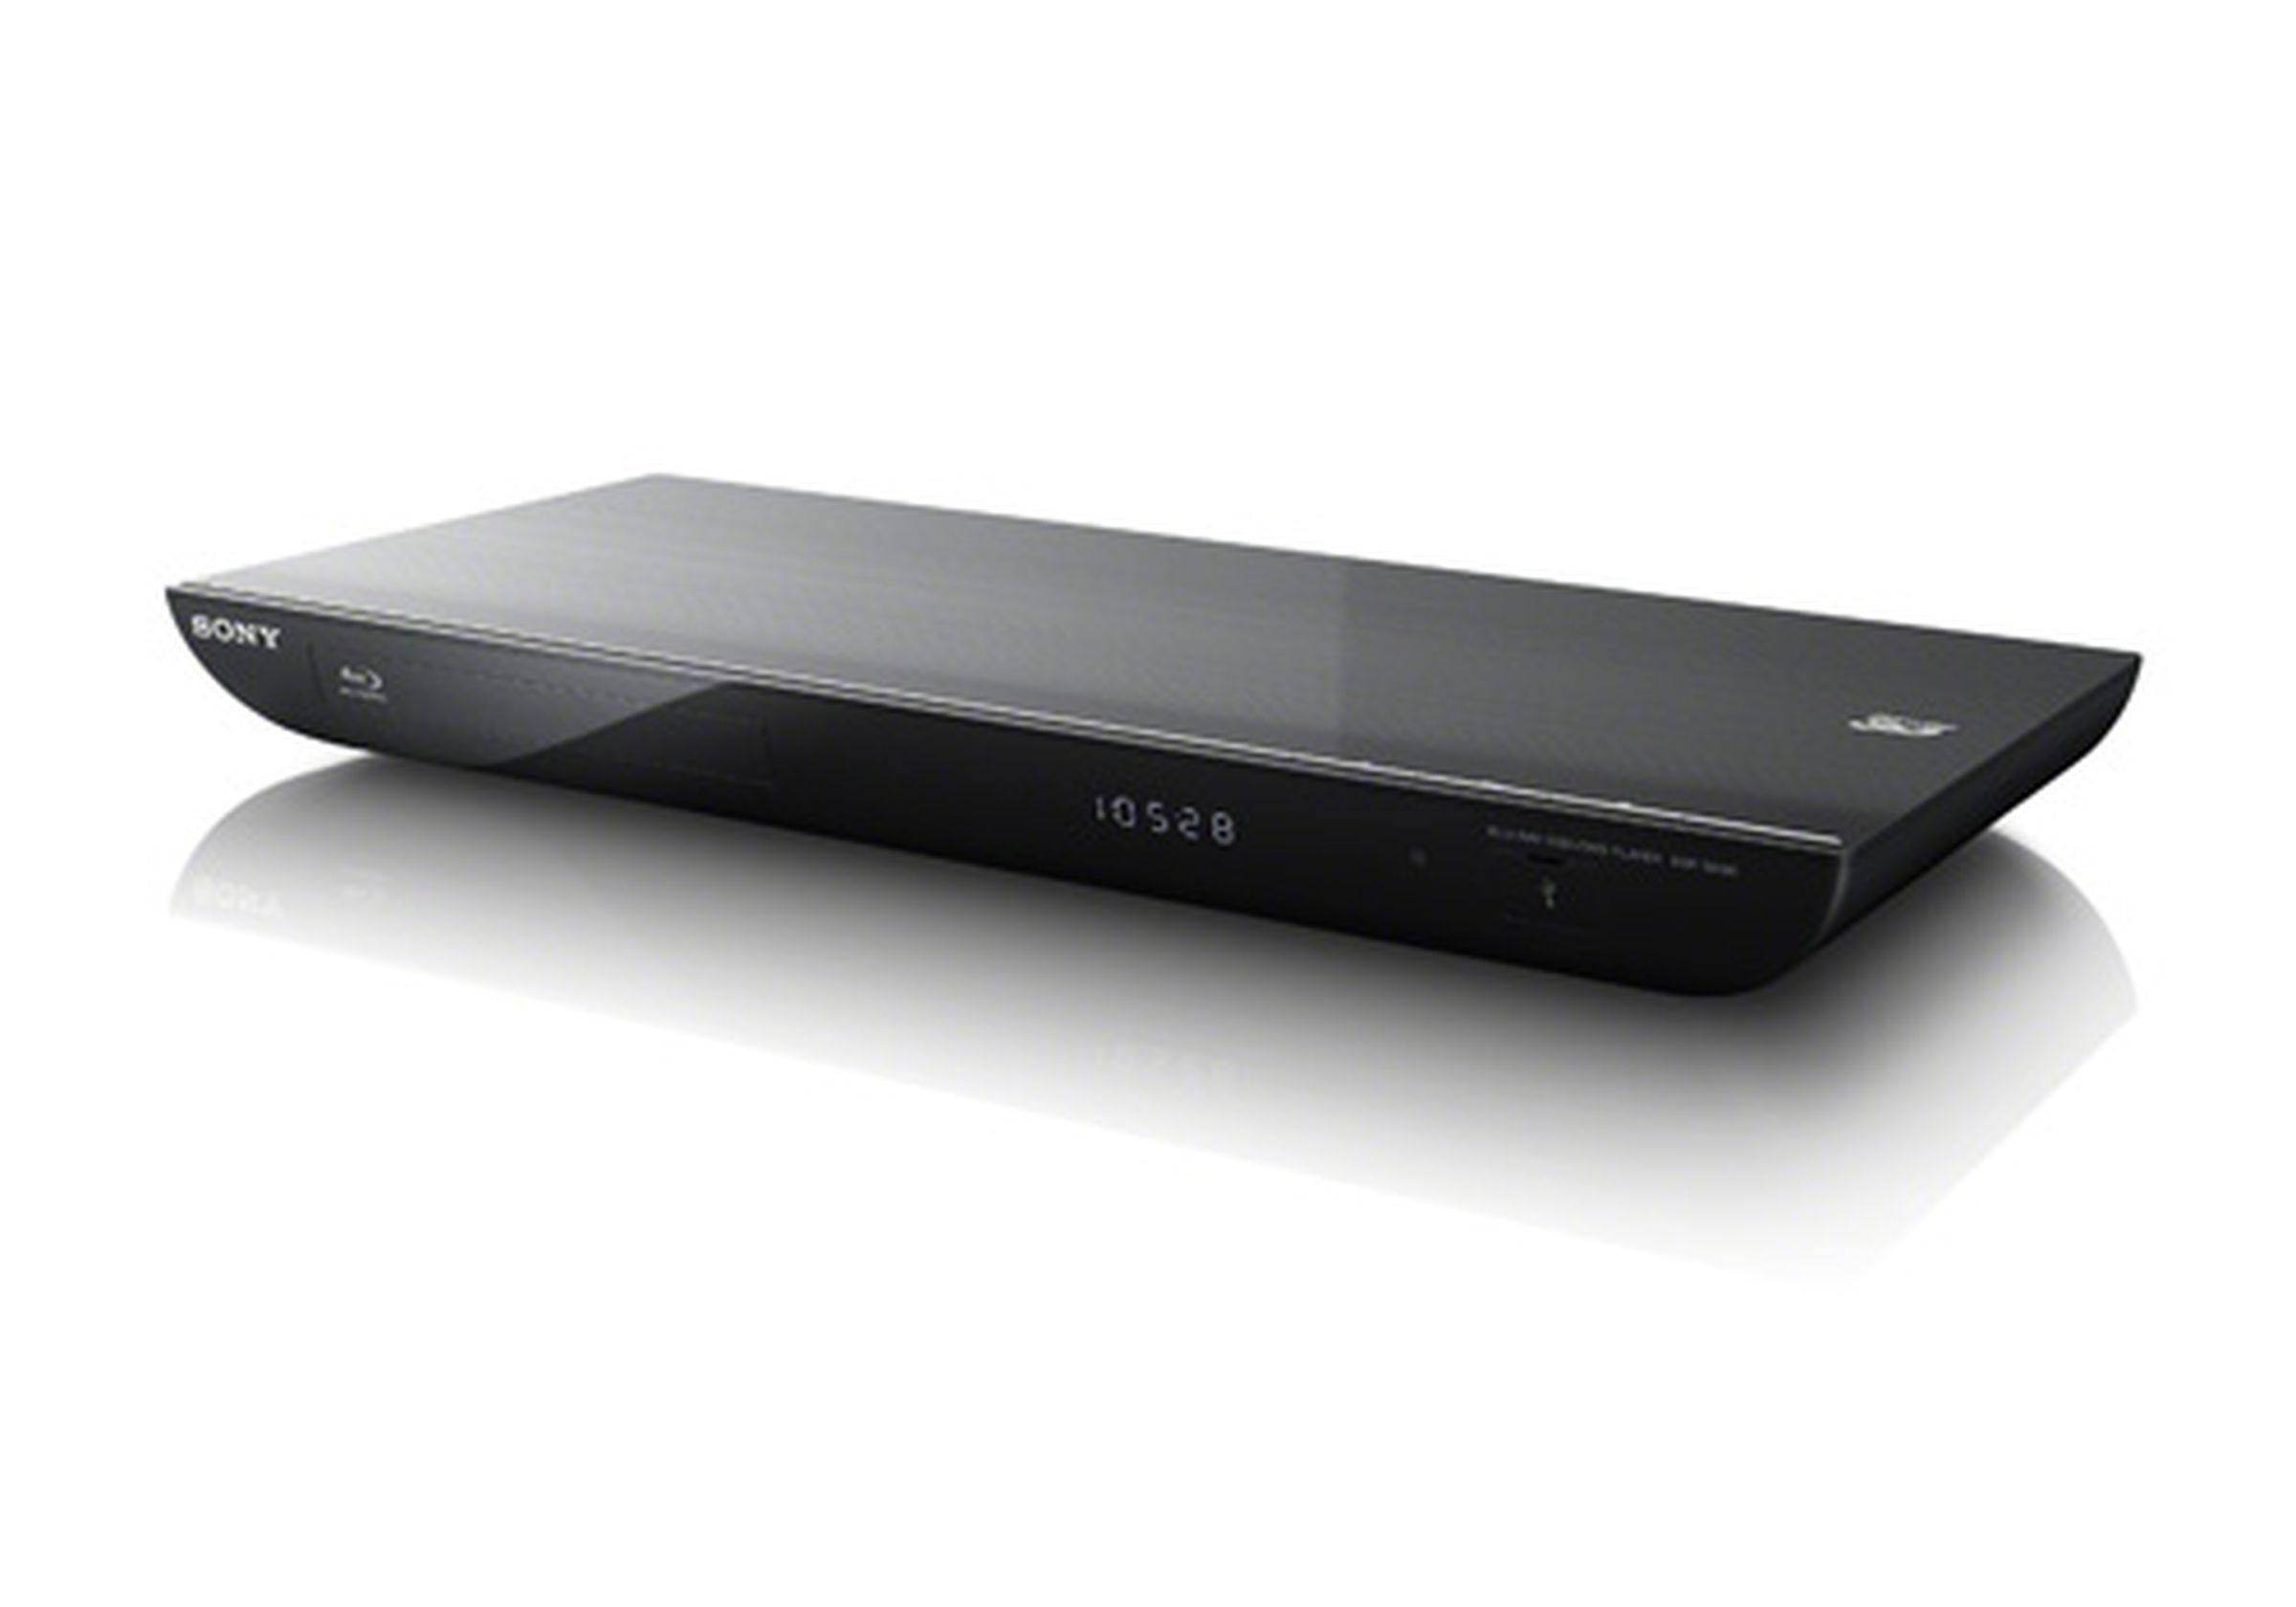 Sony smart Blu-ray players at CES 2012